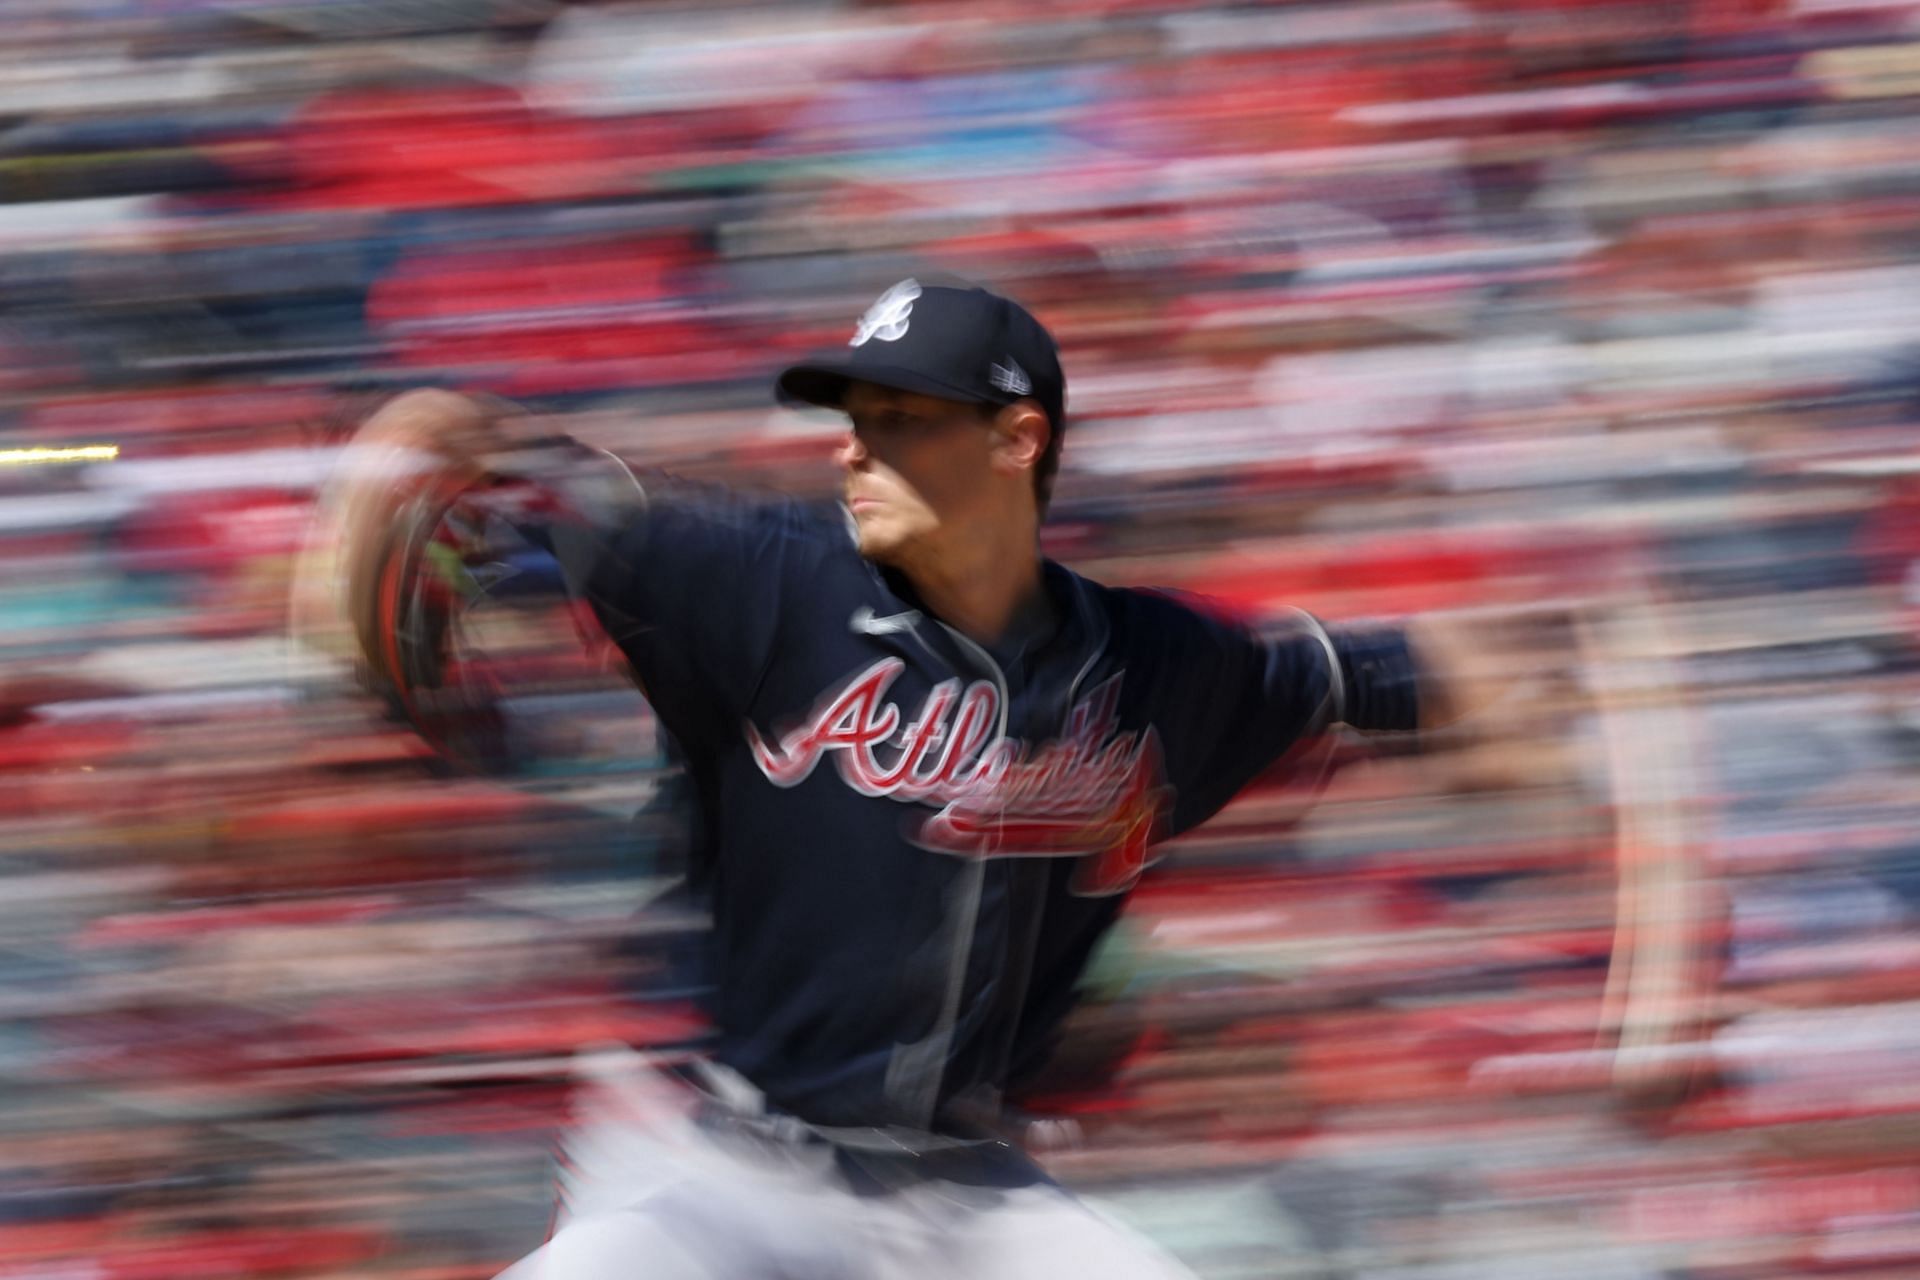 Braves get another positive injury update on Max Fried